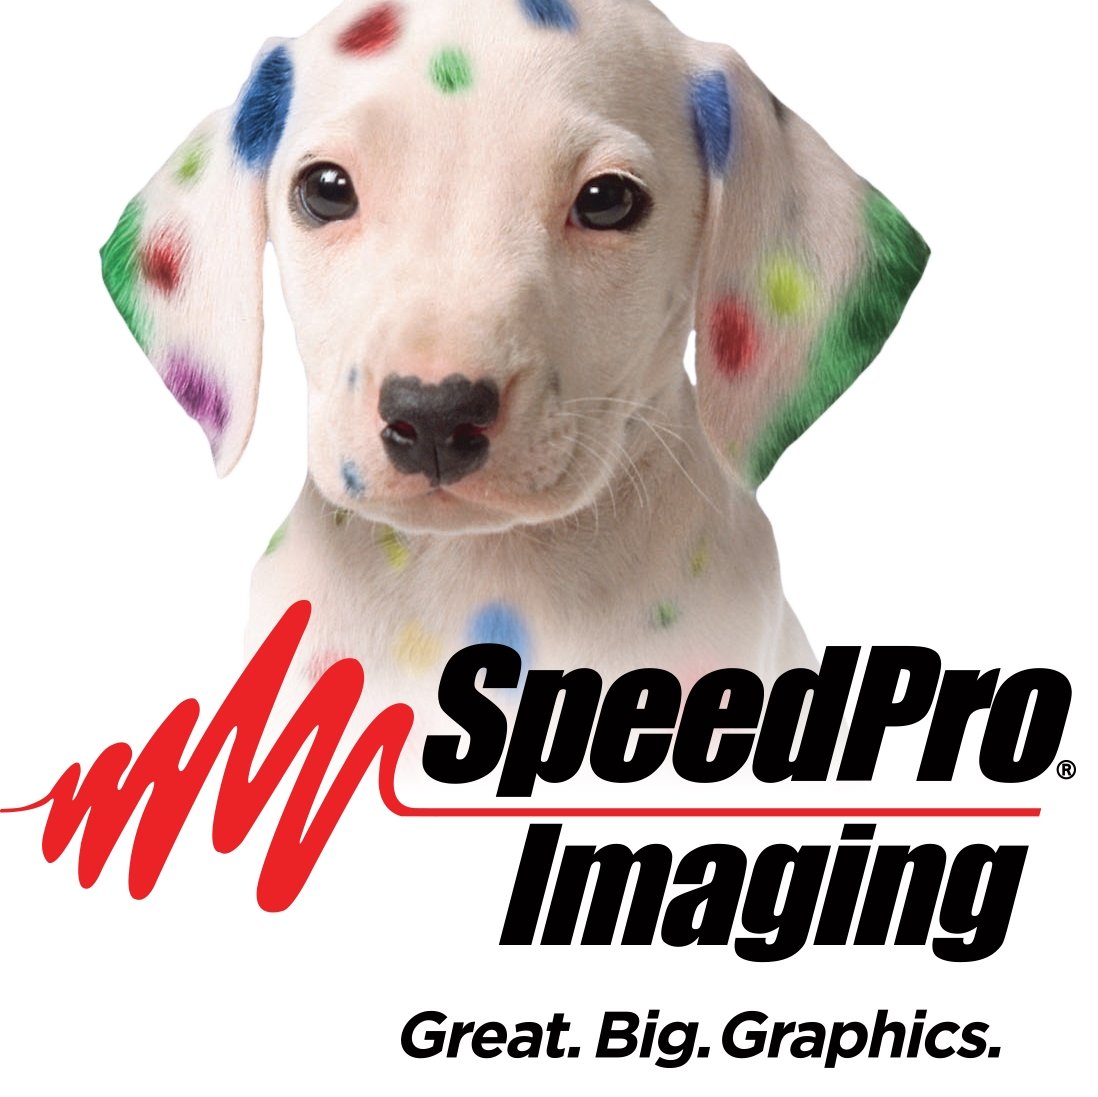 When you’re searching for large format printing in the Greater Lafayette, LA area, SpeedPro Imaging is ready to meet your needs.